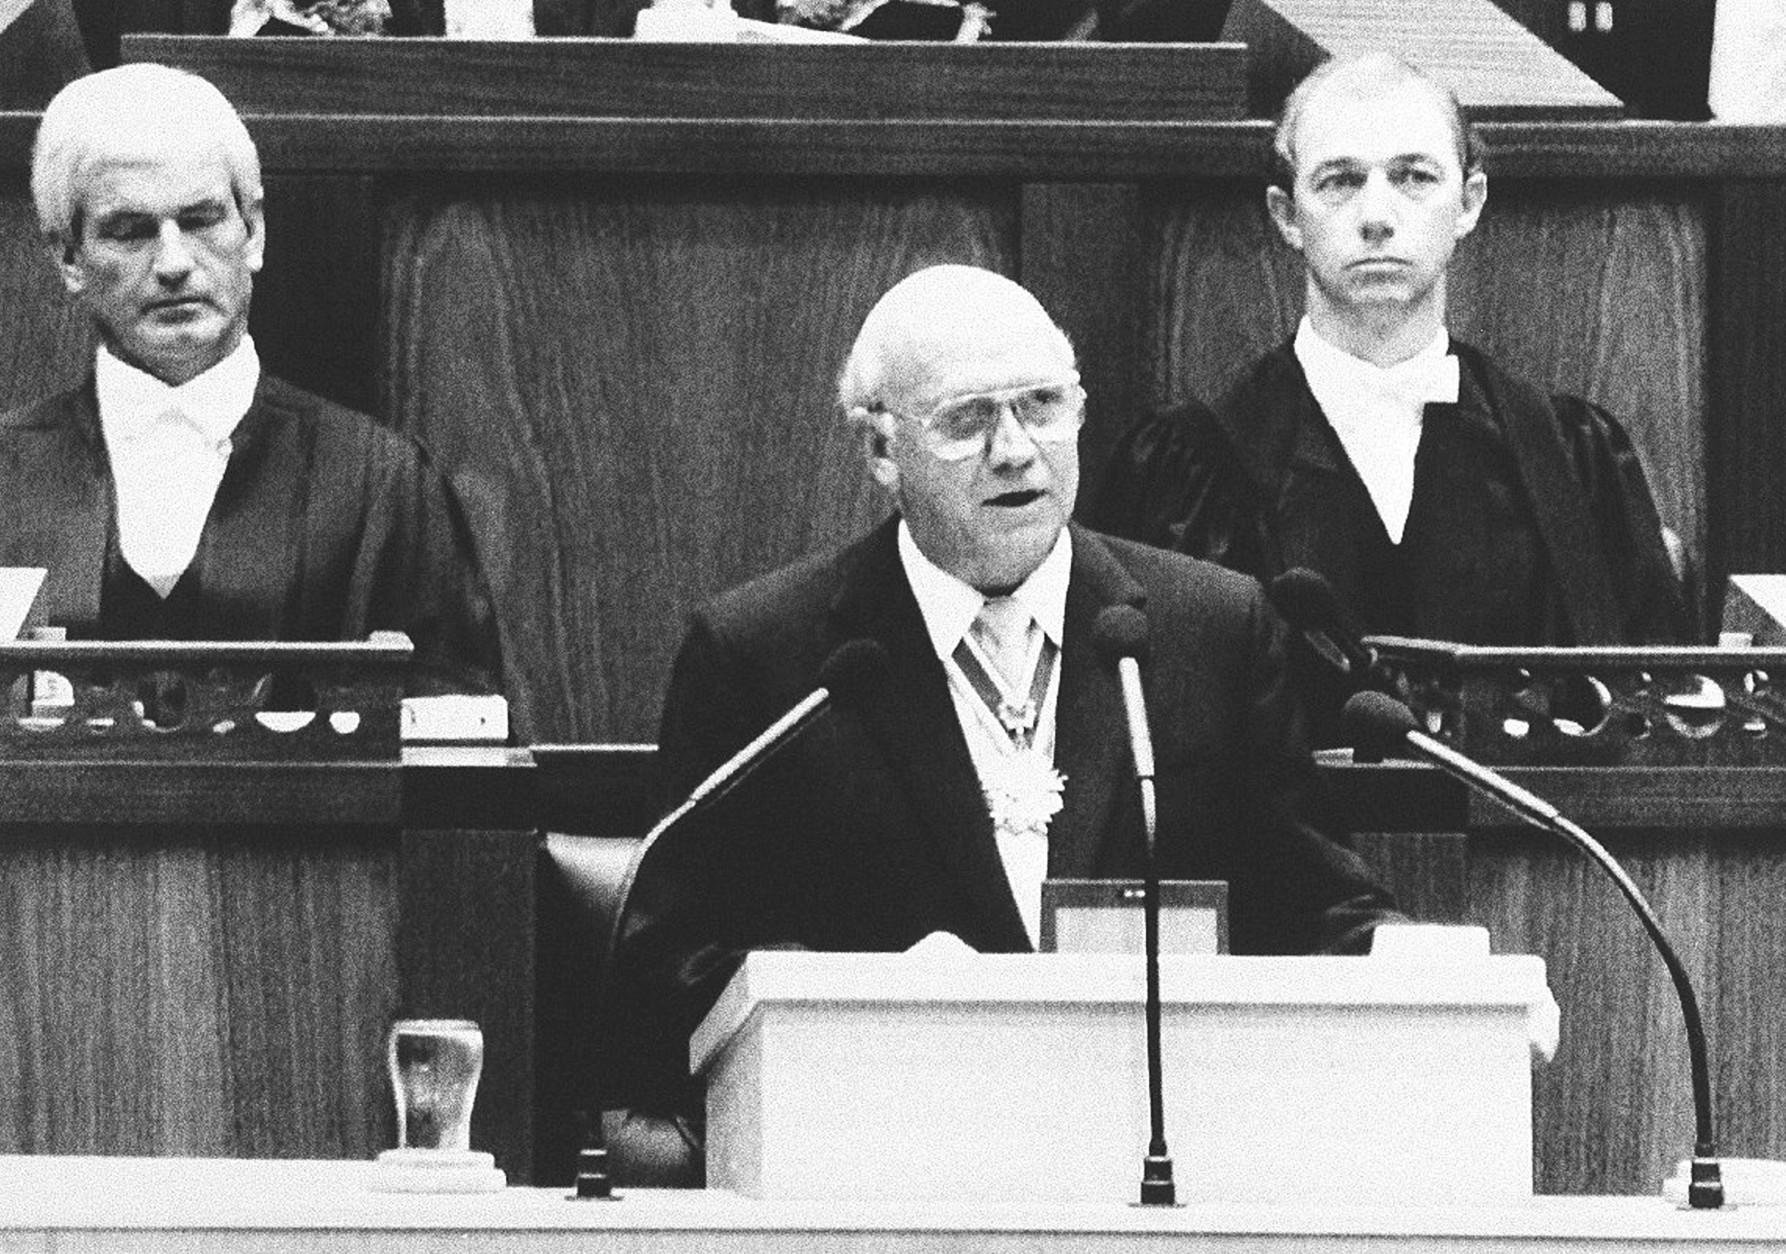 South African State President F.W. de Klerk, announces the unconditional release of jailed ANC leader Nelson Mandela, the unbanning of the ANC, PAC and South African Communist party and the lifting of the state of emergency during parliament in Cape Town, South Africa, Friday, Feb. 2, 1990. (AP Photo/Dana Le Roux-Argus)